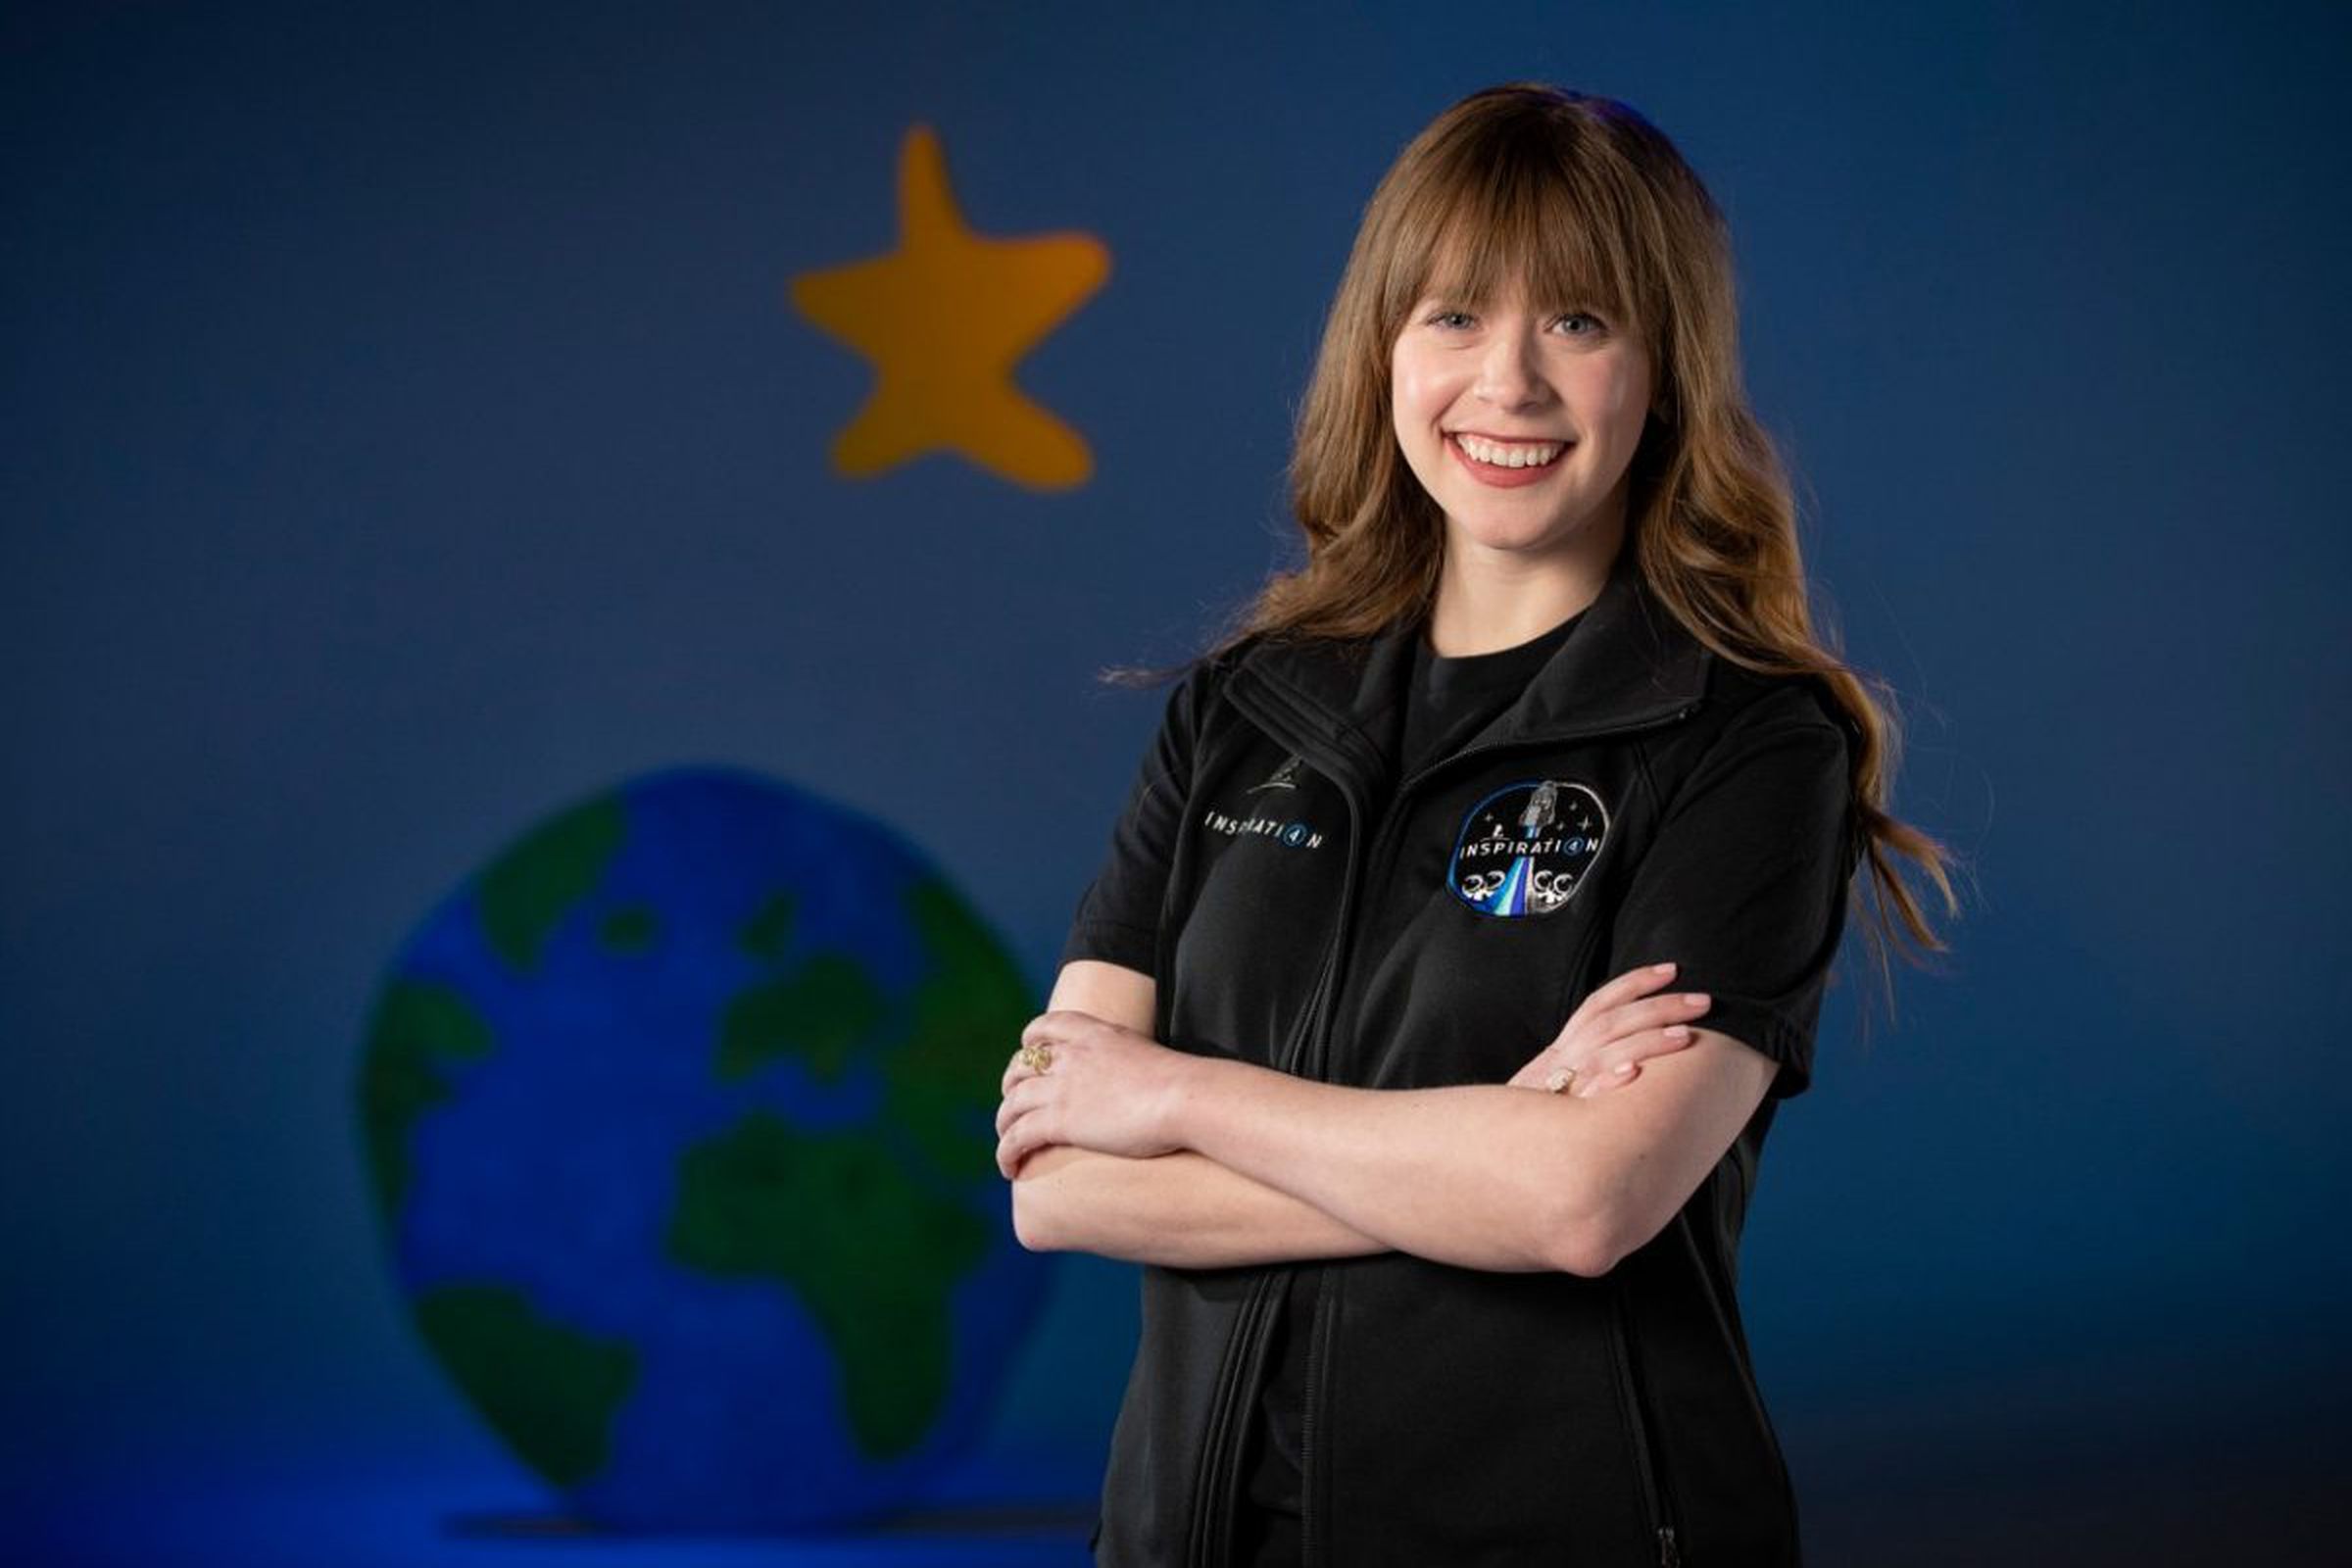 A white woman with long, light brown hair smiling and standing with her arms crossed in front of a wall painted with planet earth and a star.